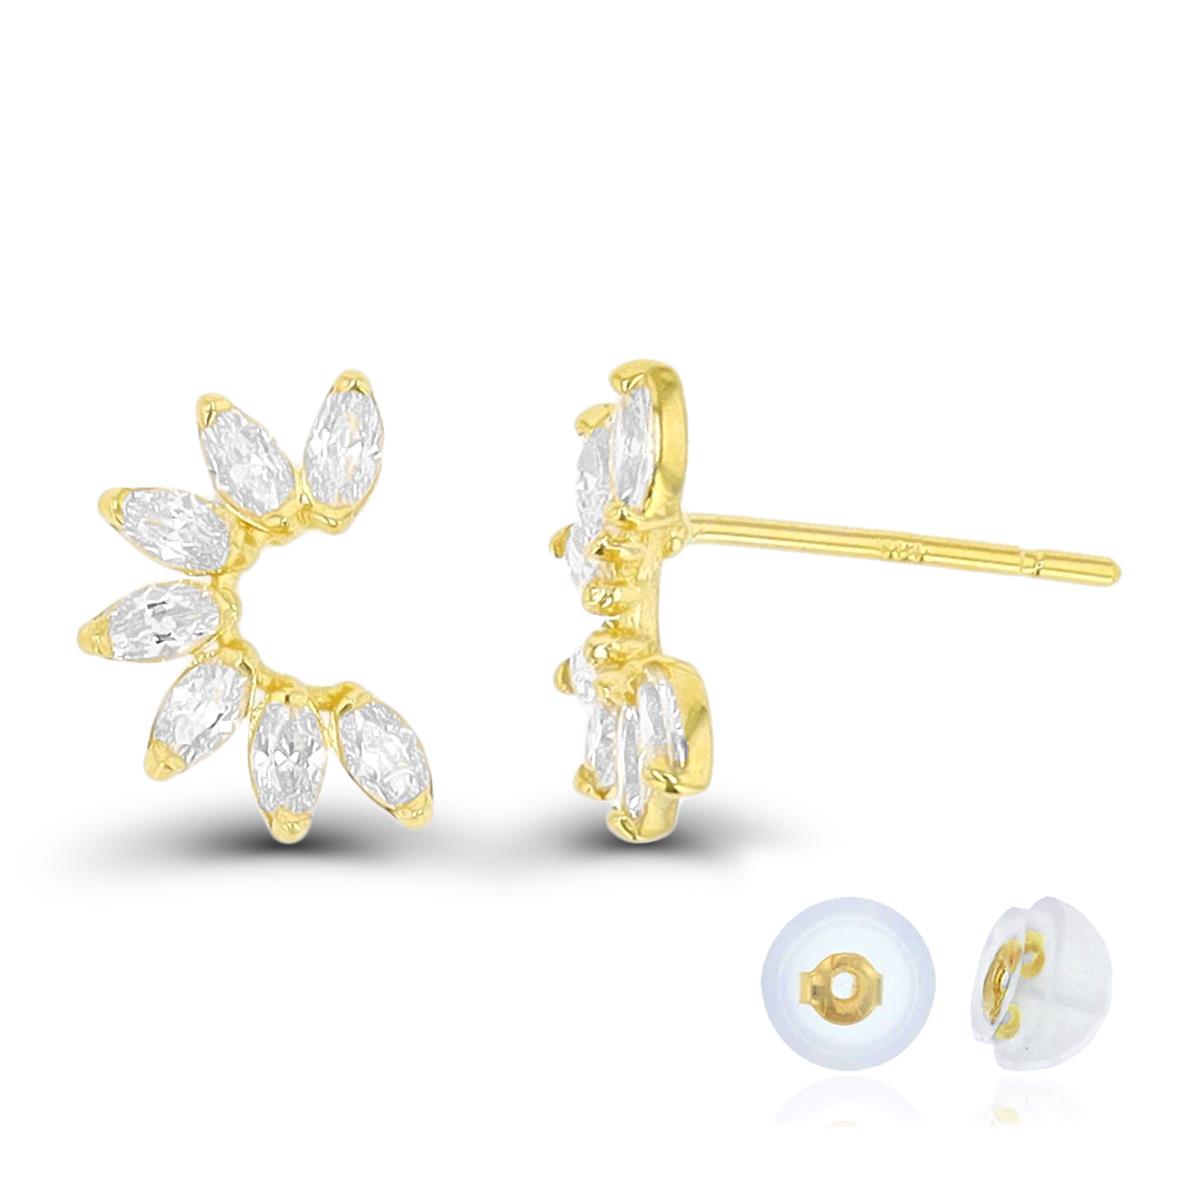 10K Yellow  Gold  8.8X5.8mm Marquise White CZ  Stud Earring